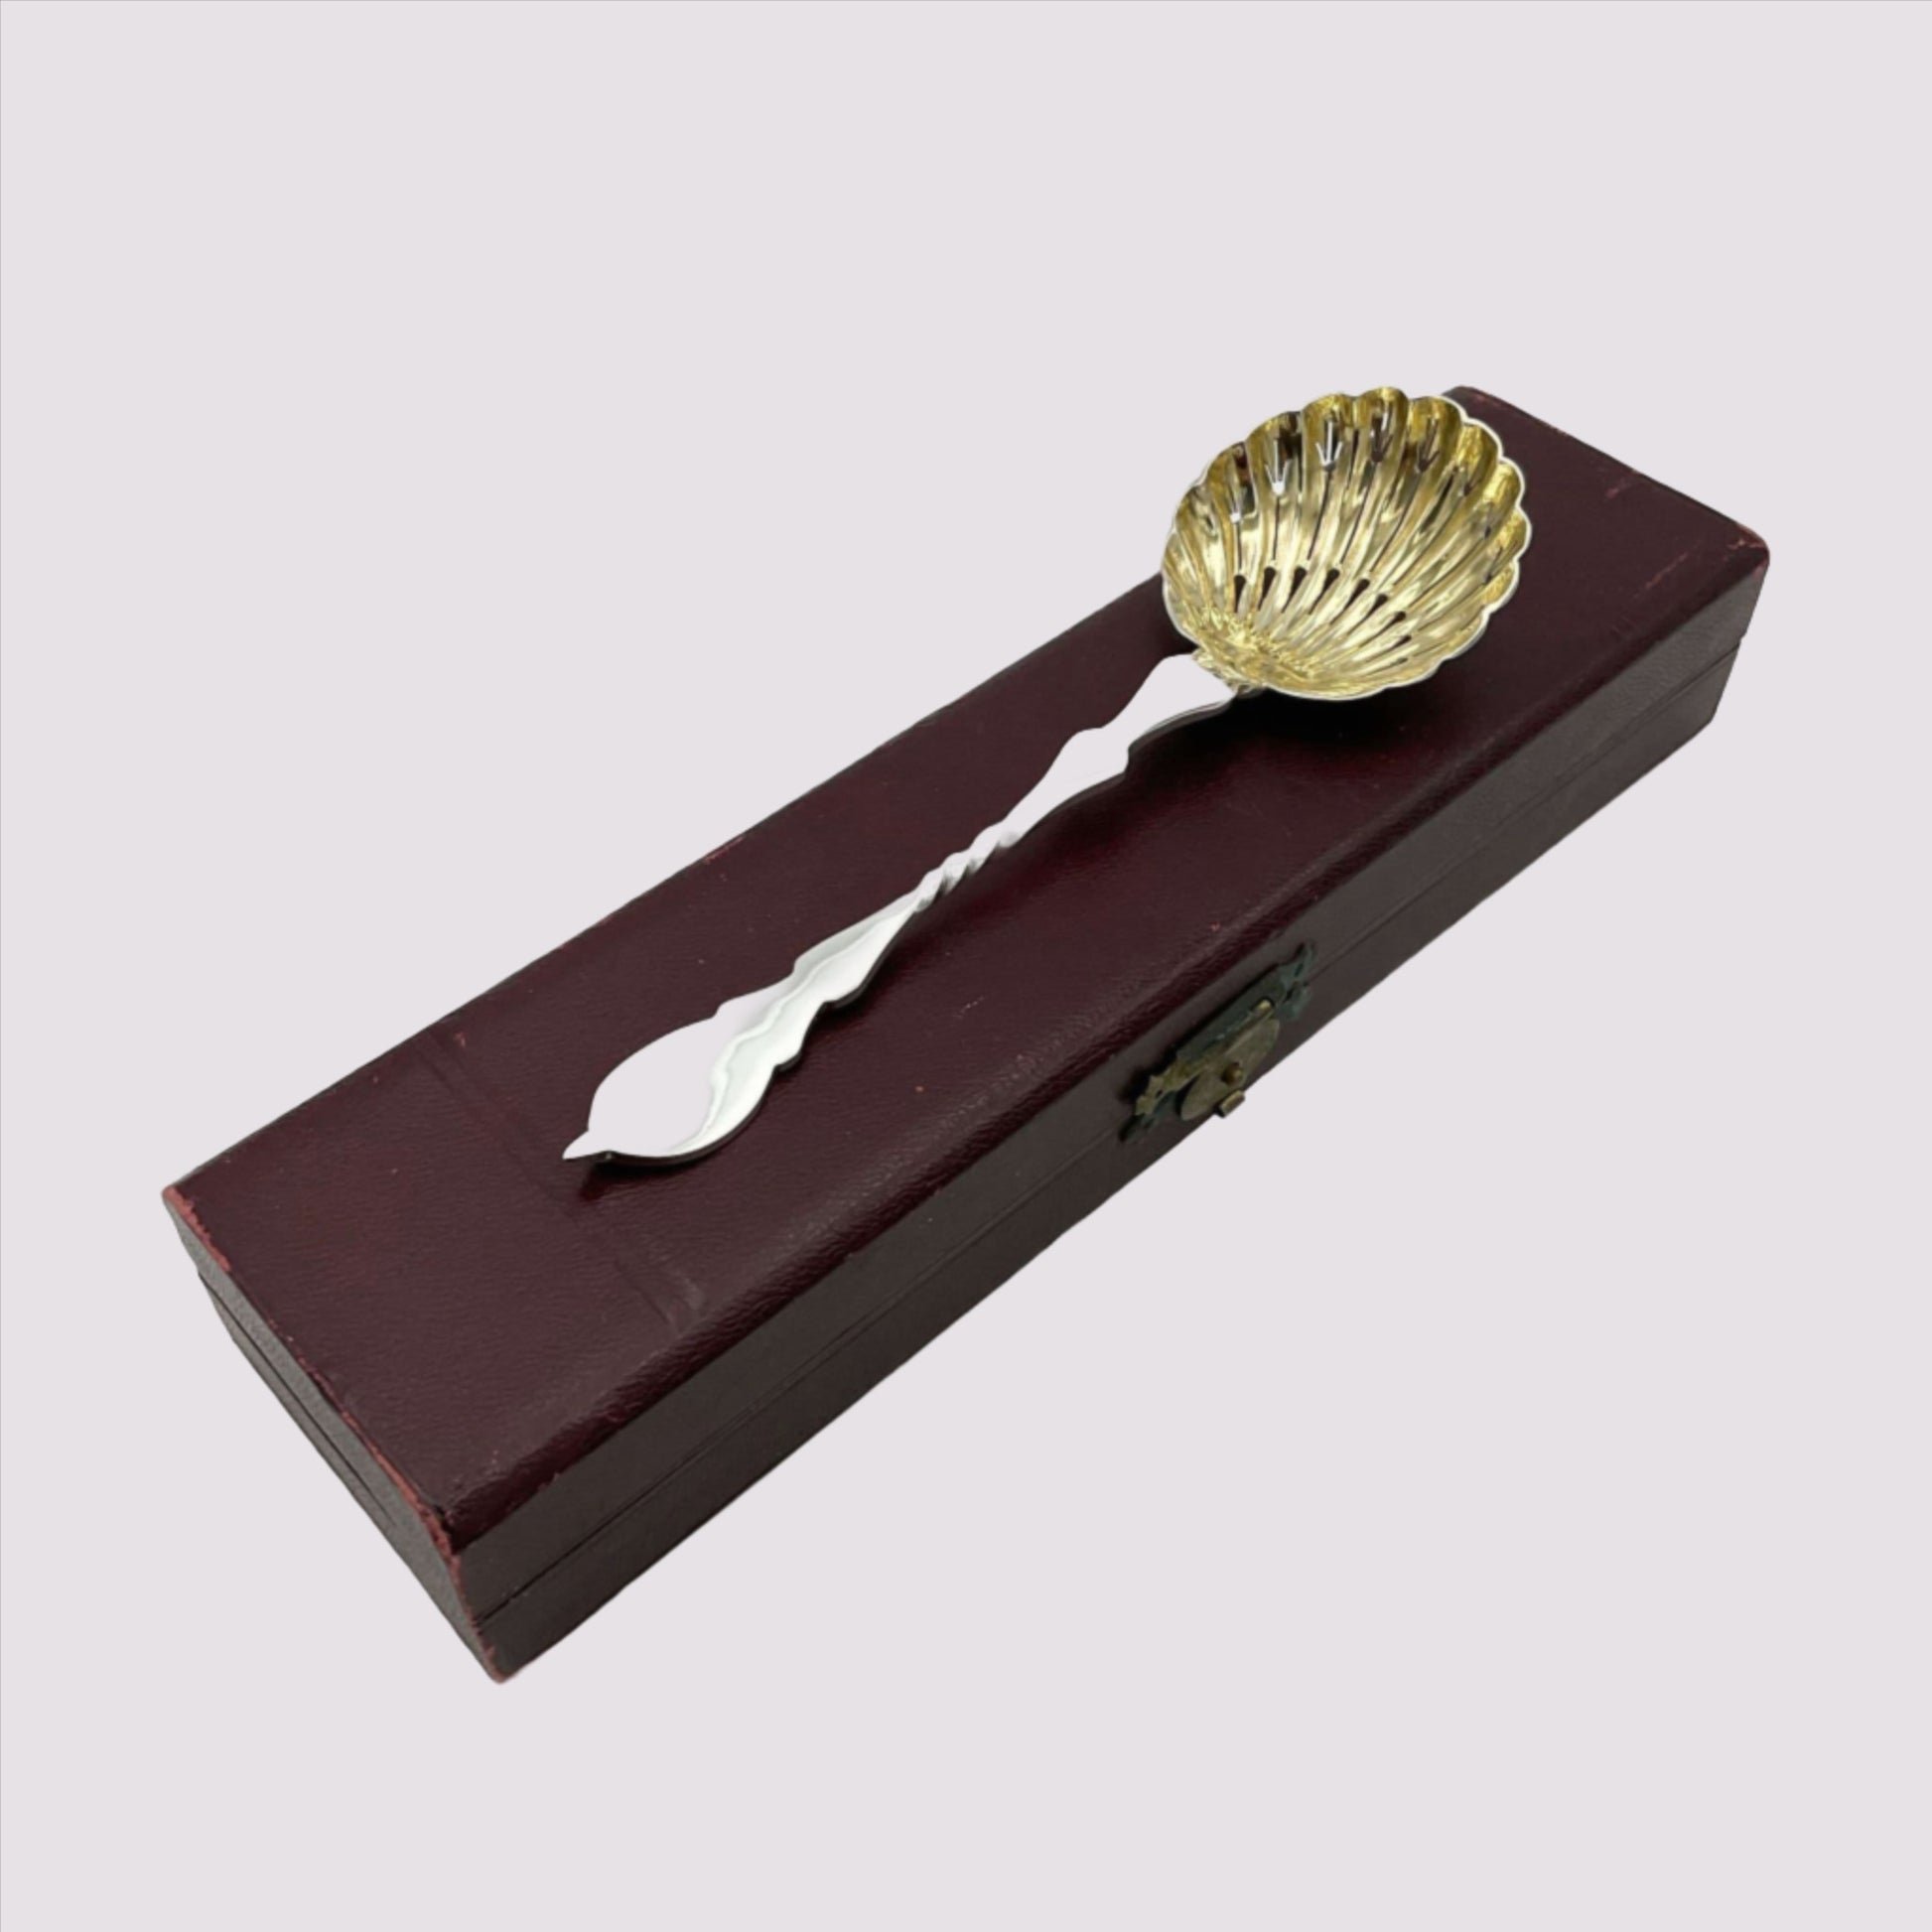 Beautiful gilded Silver sugar sifter spoon on top of presentation box